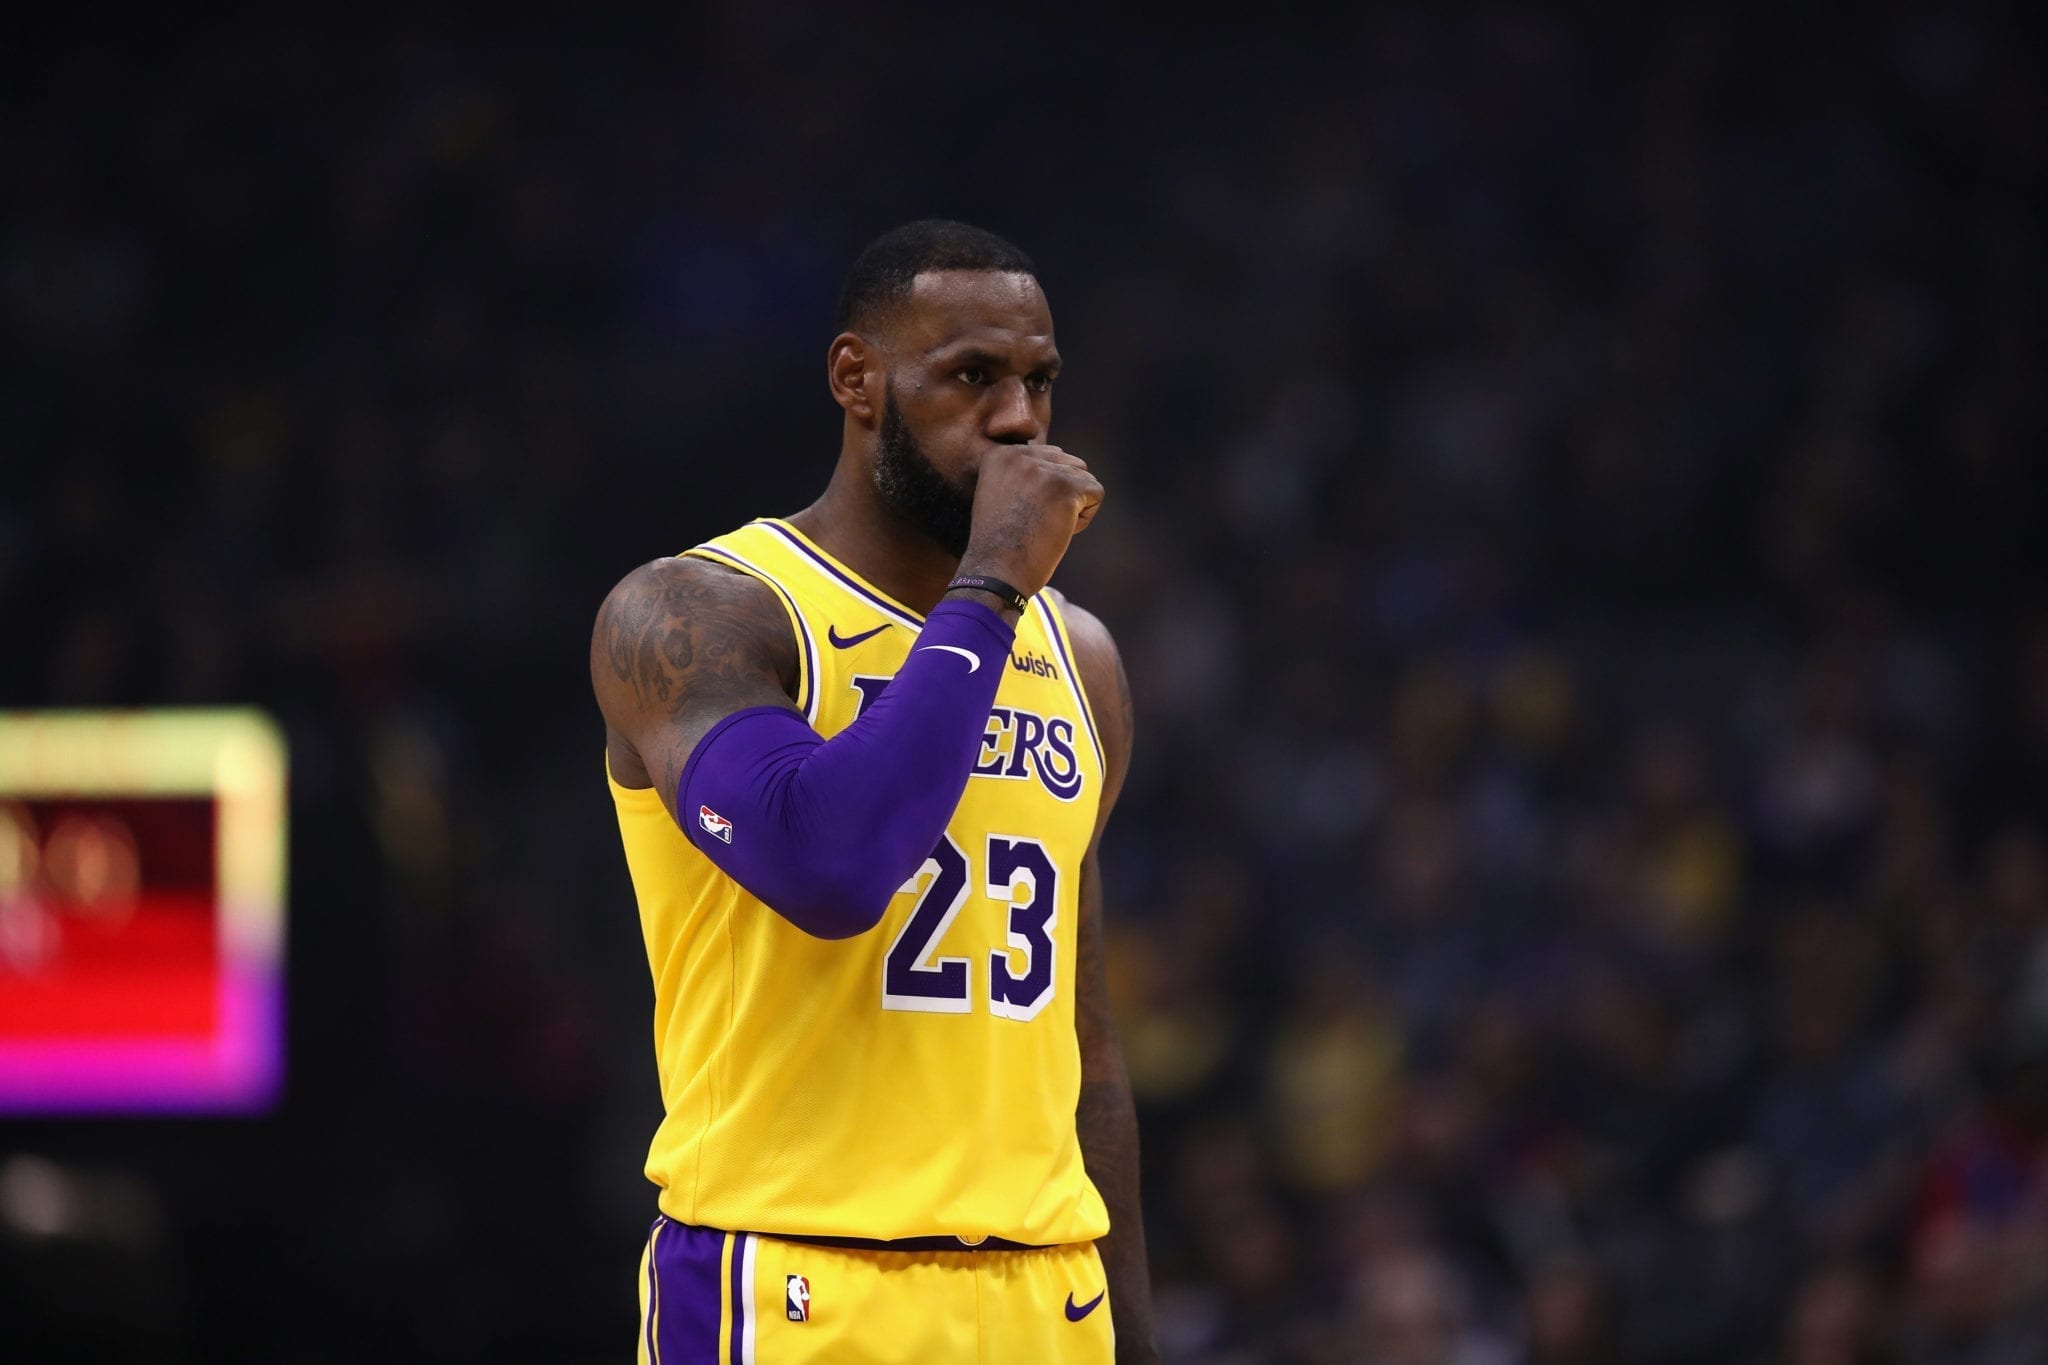 SACRAMENTO, CA - NOVEMBER 10: LeBron James #23 of the Los Angeles Lakers stands on the court during their game against the Sacramento Kings at Golden 1 Center on November 10, 2018 in Sacramento, California. NOTE TO USER: User expressly acknowledges and agrees that, by downloading and or using this photograph, User is consenting to the terms and conditions of the Getty Images License Agreement. (Photo by Ezra Shaw/Getty Images)